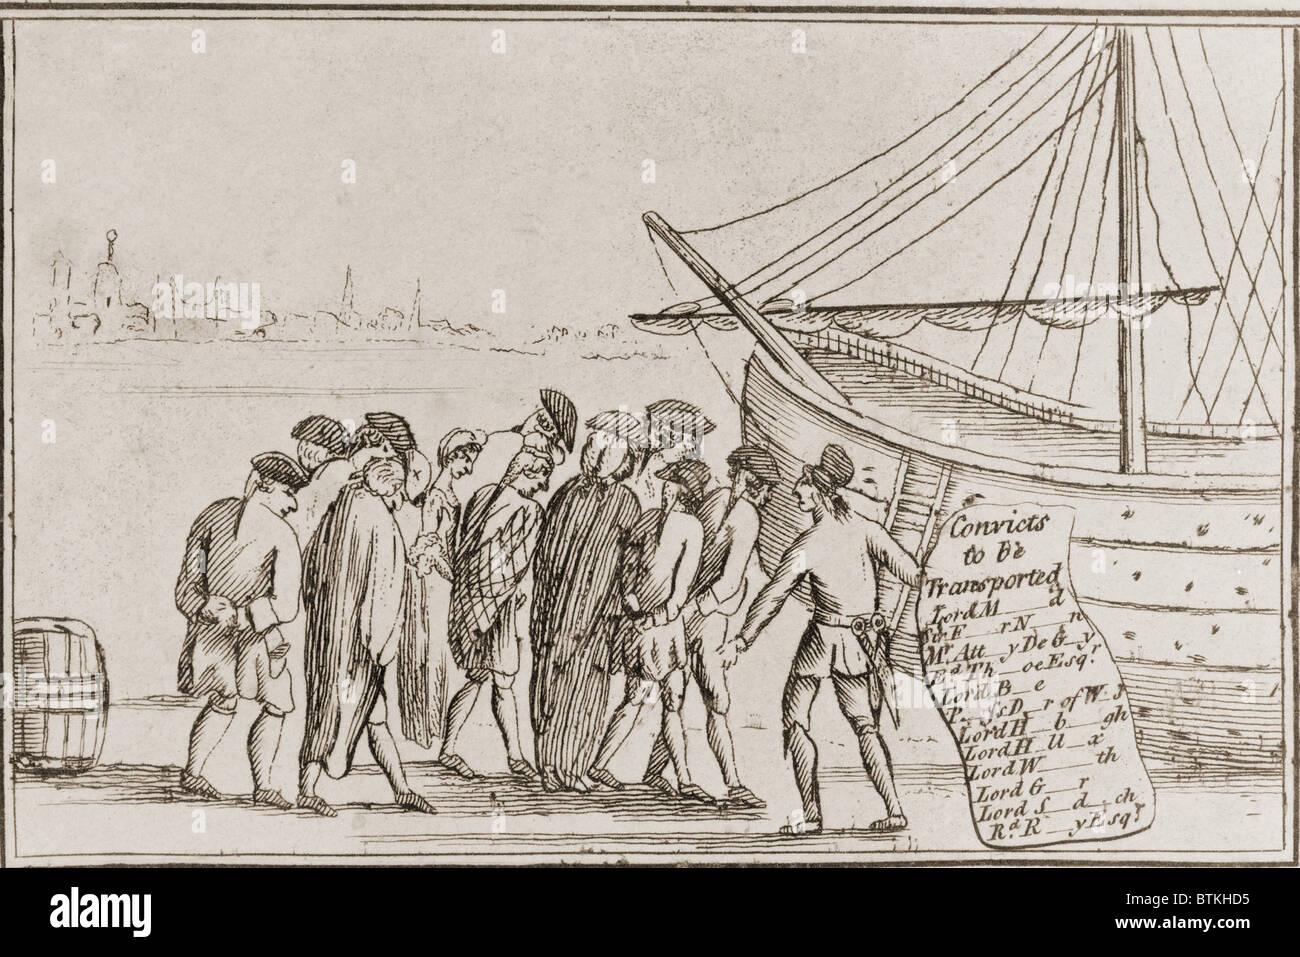 Forced emigration to the colony of Georgia in North America of debt ridden English lords, esquires, and attorneys, who were sentenced to transportation to Georgia. The deportation of debtors reduced the English prison population during the early reign of George III. Stock Photo